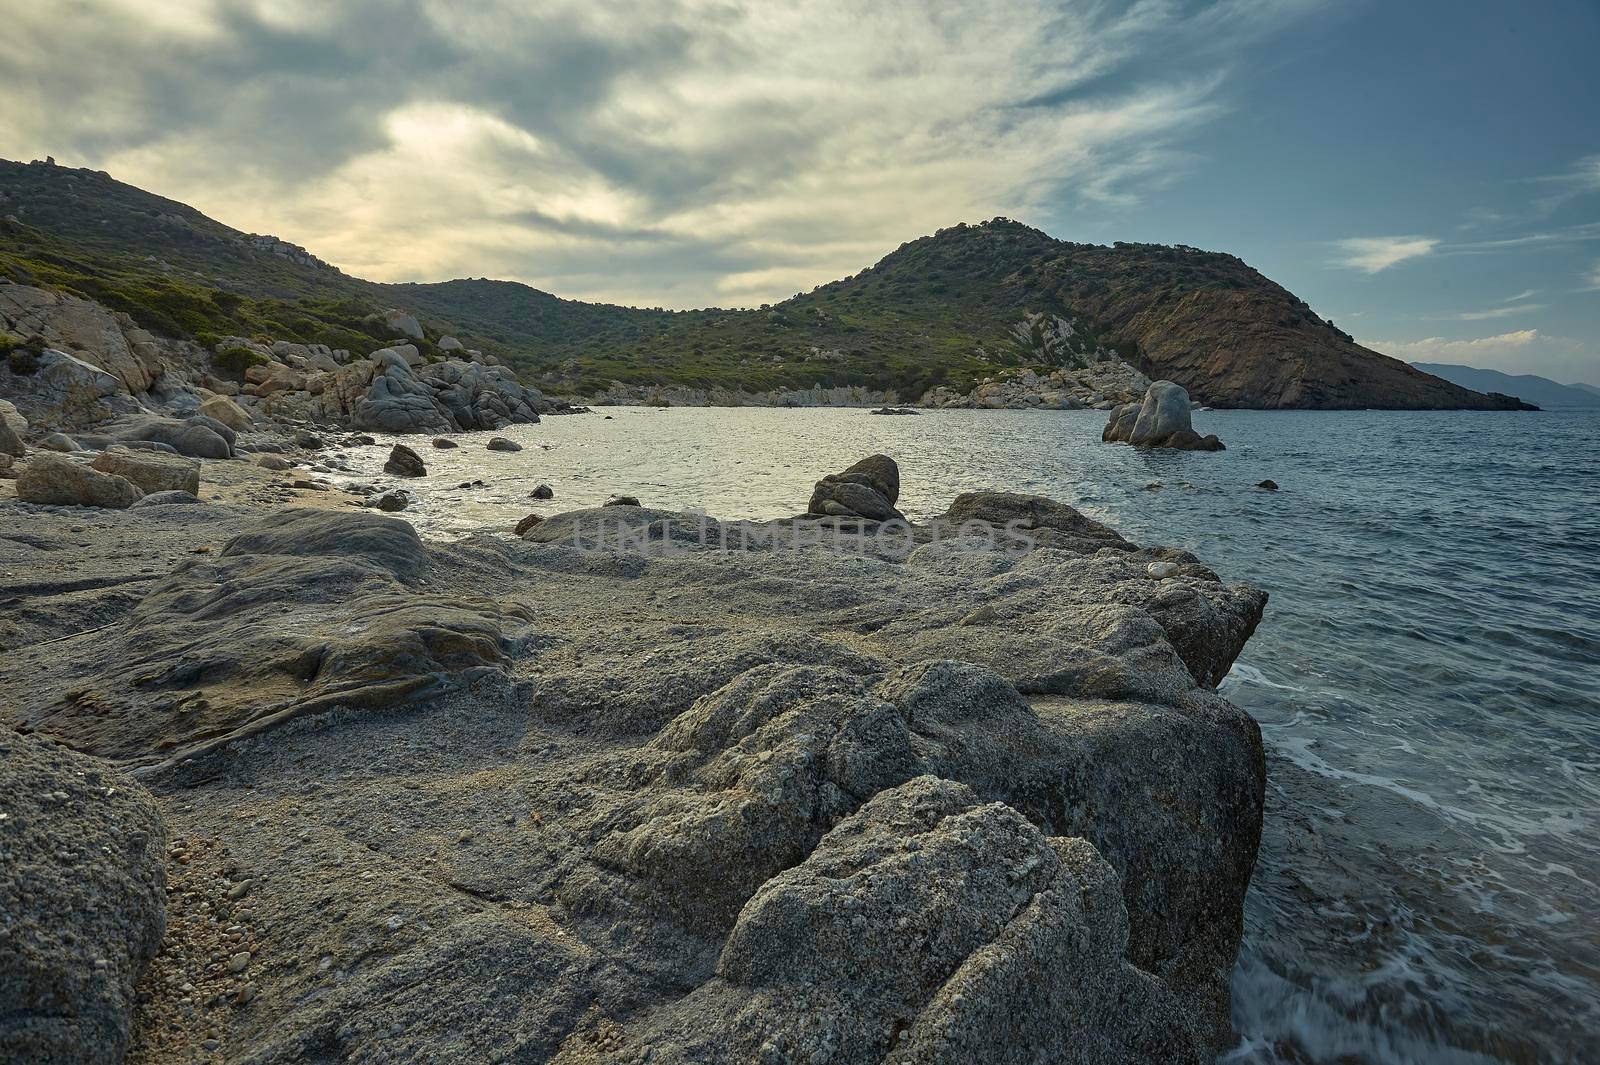 The rocks of the Mediterranean beach at sunset. by pippocarlot